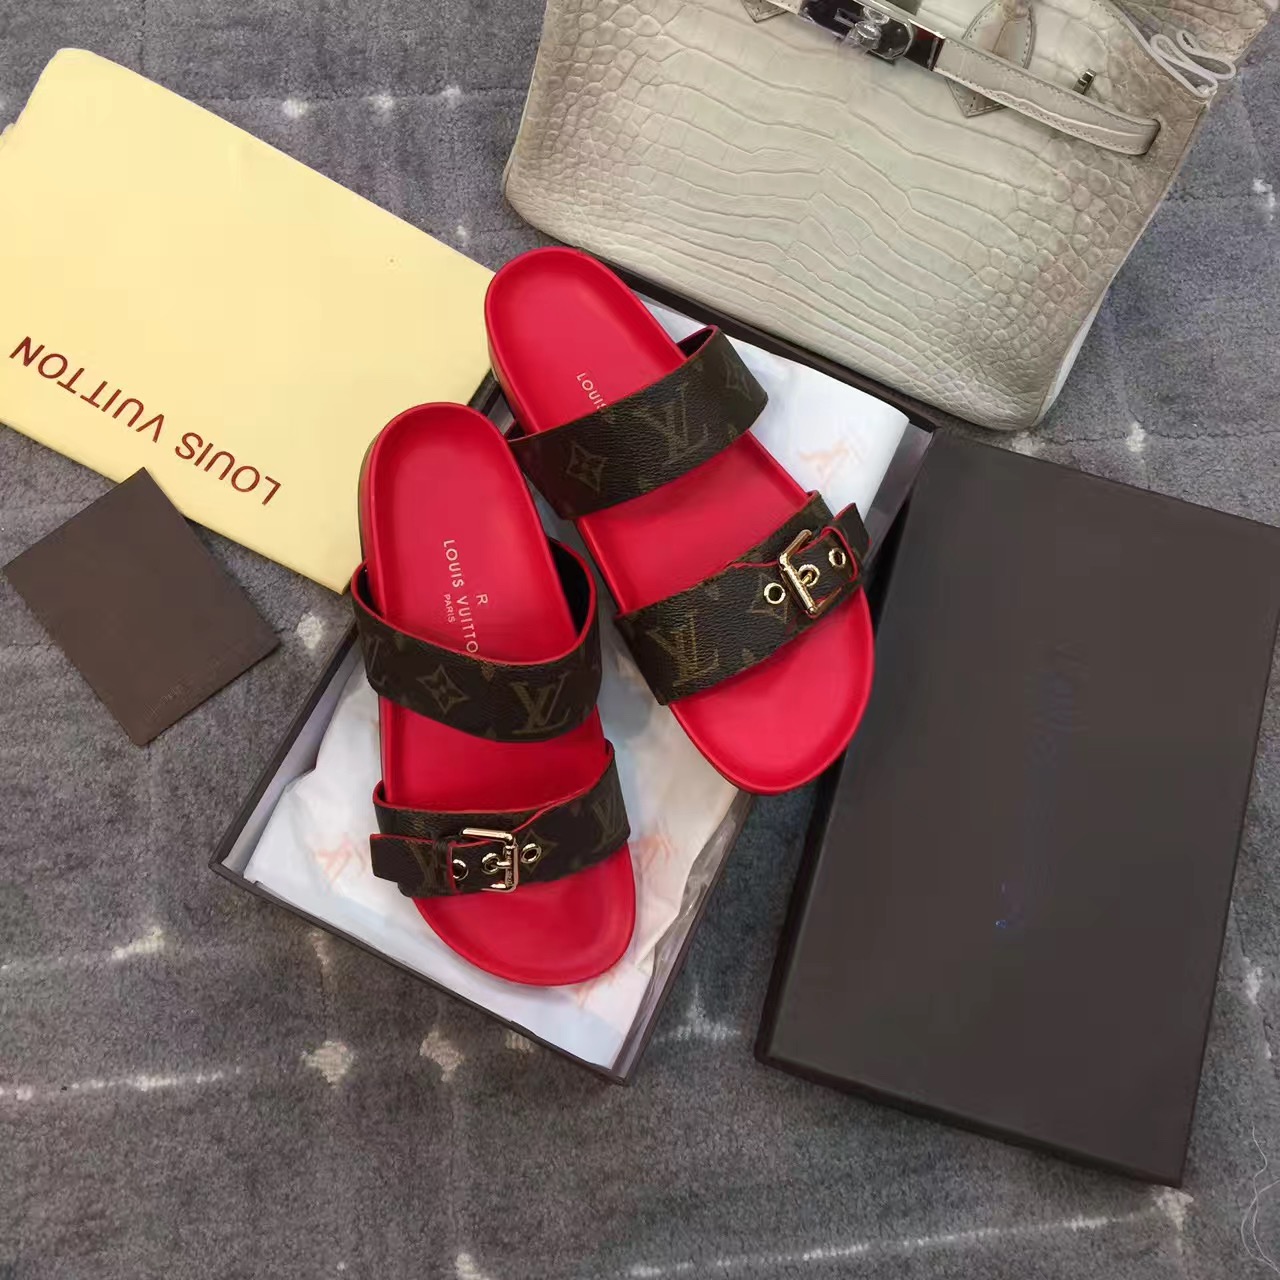 Louis Vuitton Bom Dia Mule One Year Review ( Wear , Pros and Cons